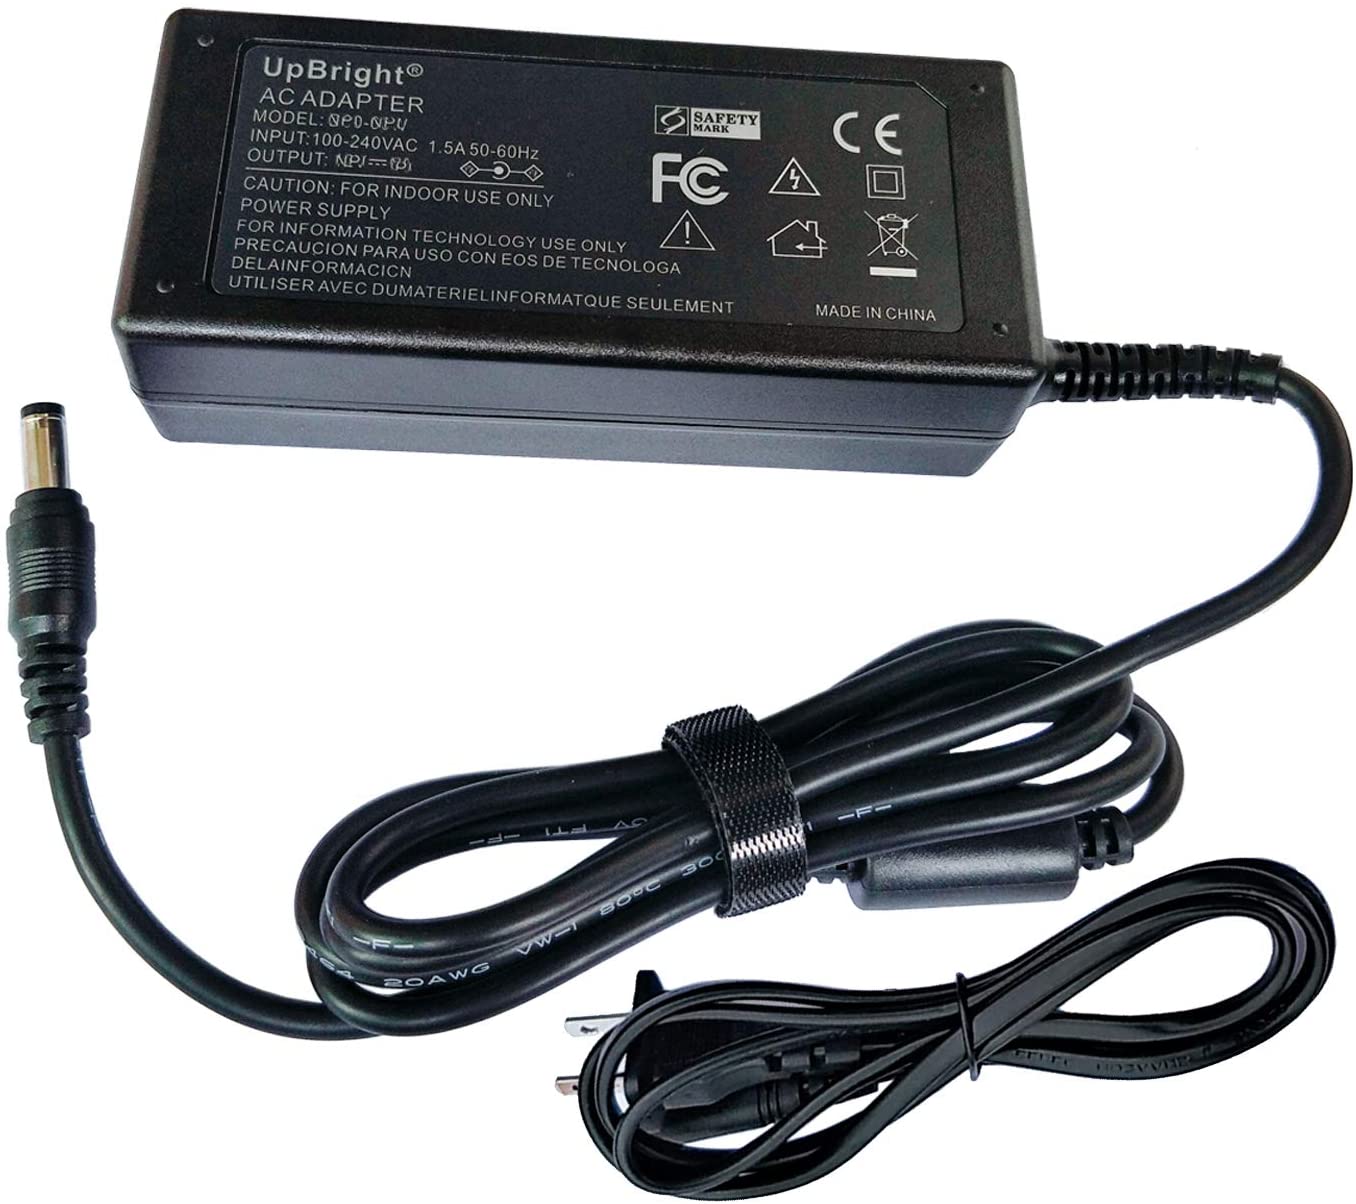 UpBright NEW 16V 2.5A AC/DC Adapter For Fujitsu ScanSnap SV600 FI-SV600 FI-SV600A FI-SV600A-P PA03641-B305 fi-7030 PA03750-B005 PA03750-B001 N7100 PA03706-B205 Scanner, FMC- - image 1 of 5